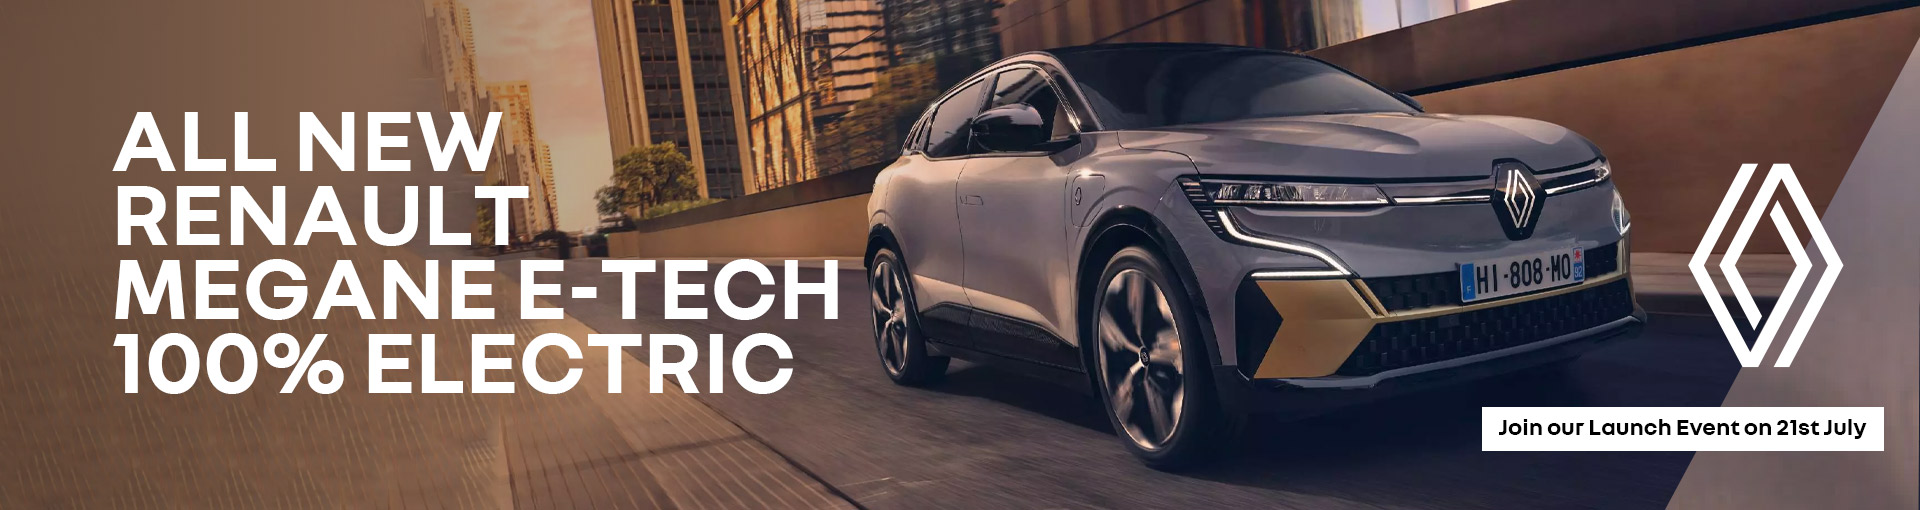 All-new Renault Megane E-tech 100% Electric